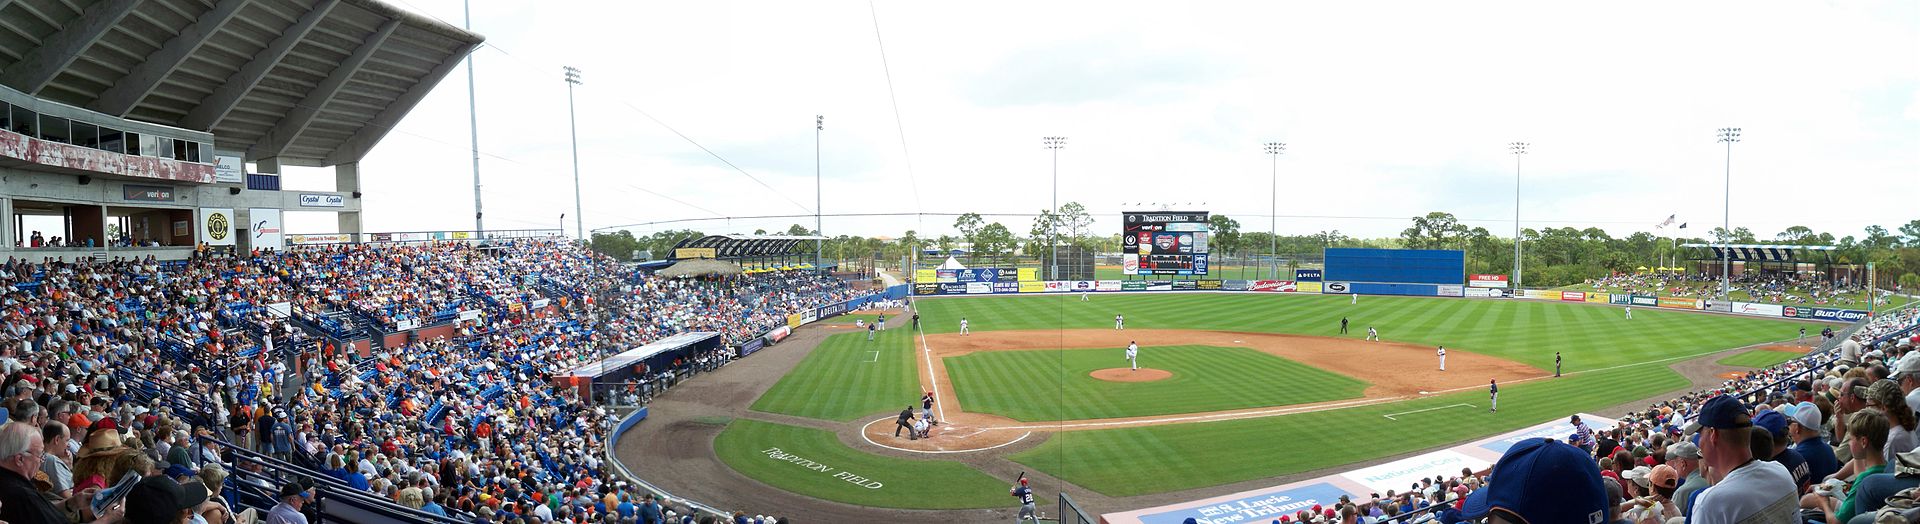 St. Lucie Mets vs. Clearwater Threshers